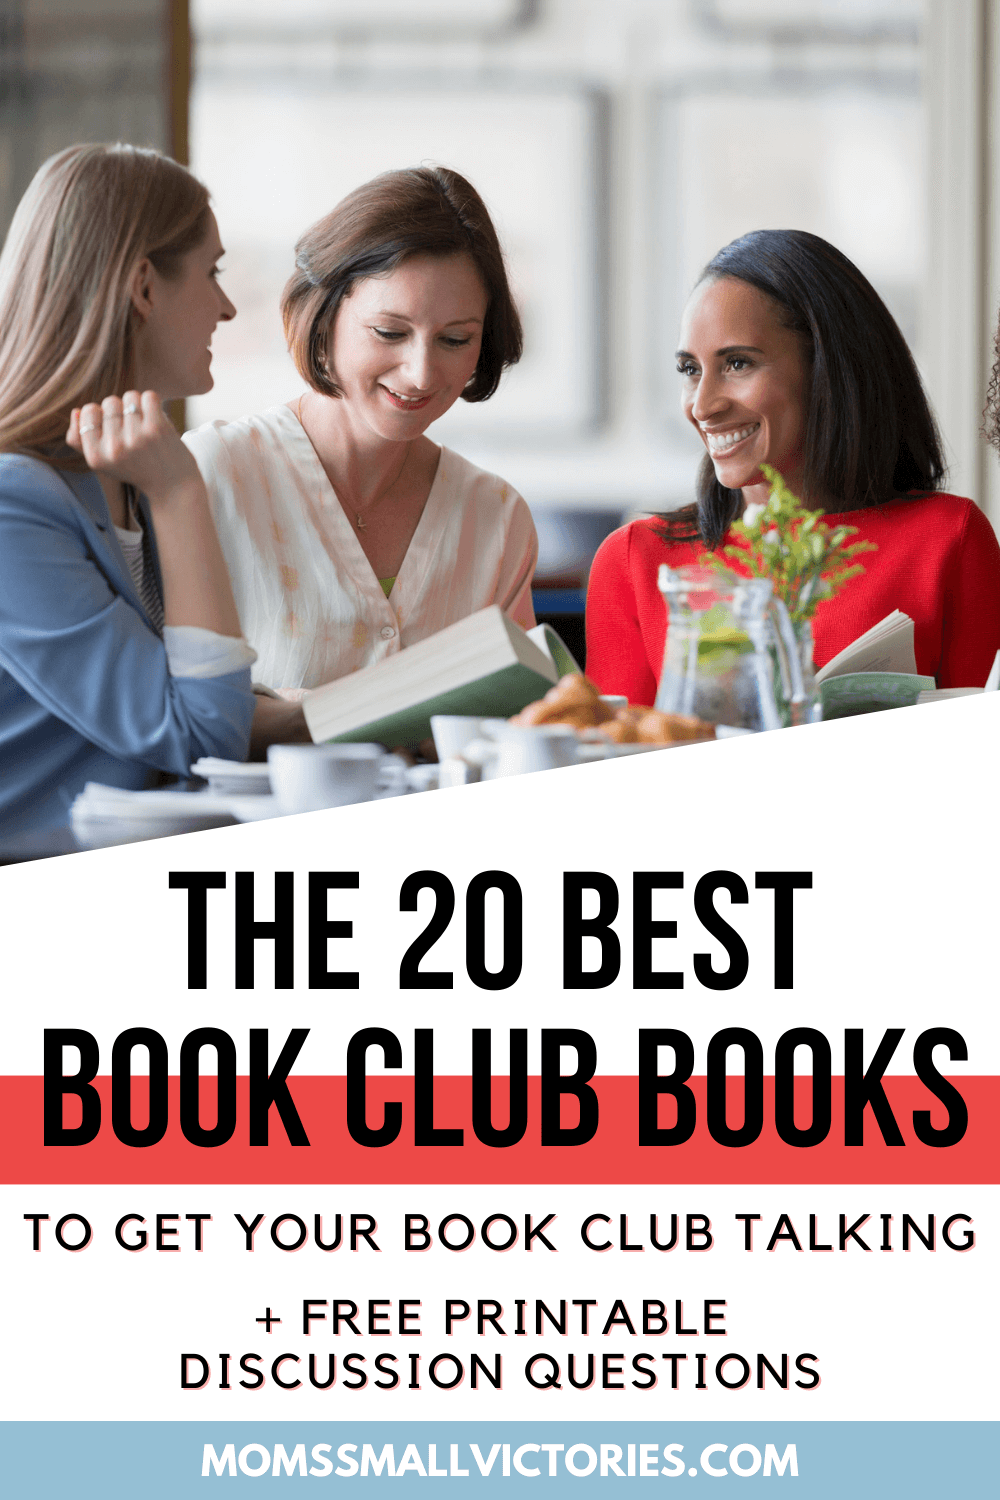 Running out of ideas for your book club to read? These 20 of the best book club suggestions will get even the most introverted bunch of book lovers talking and free printable book club discussion questions